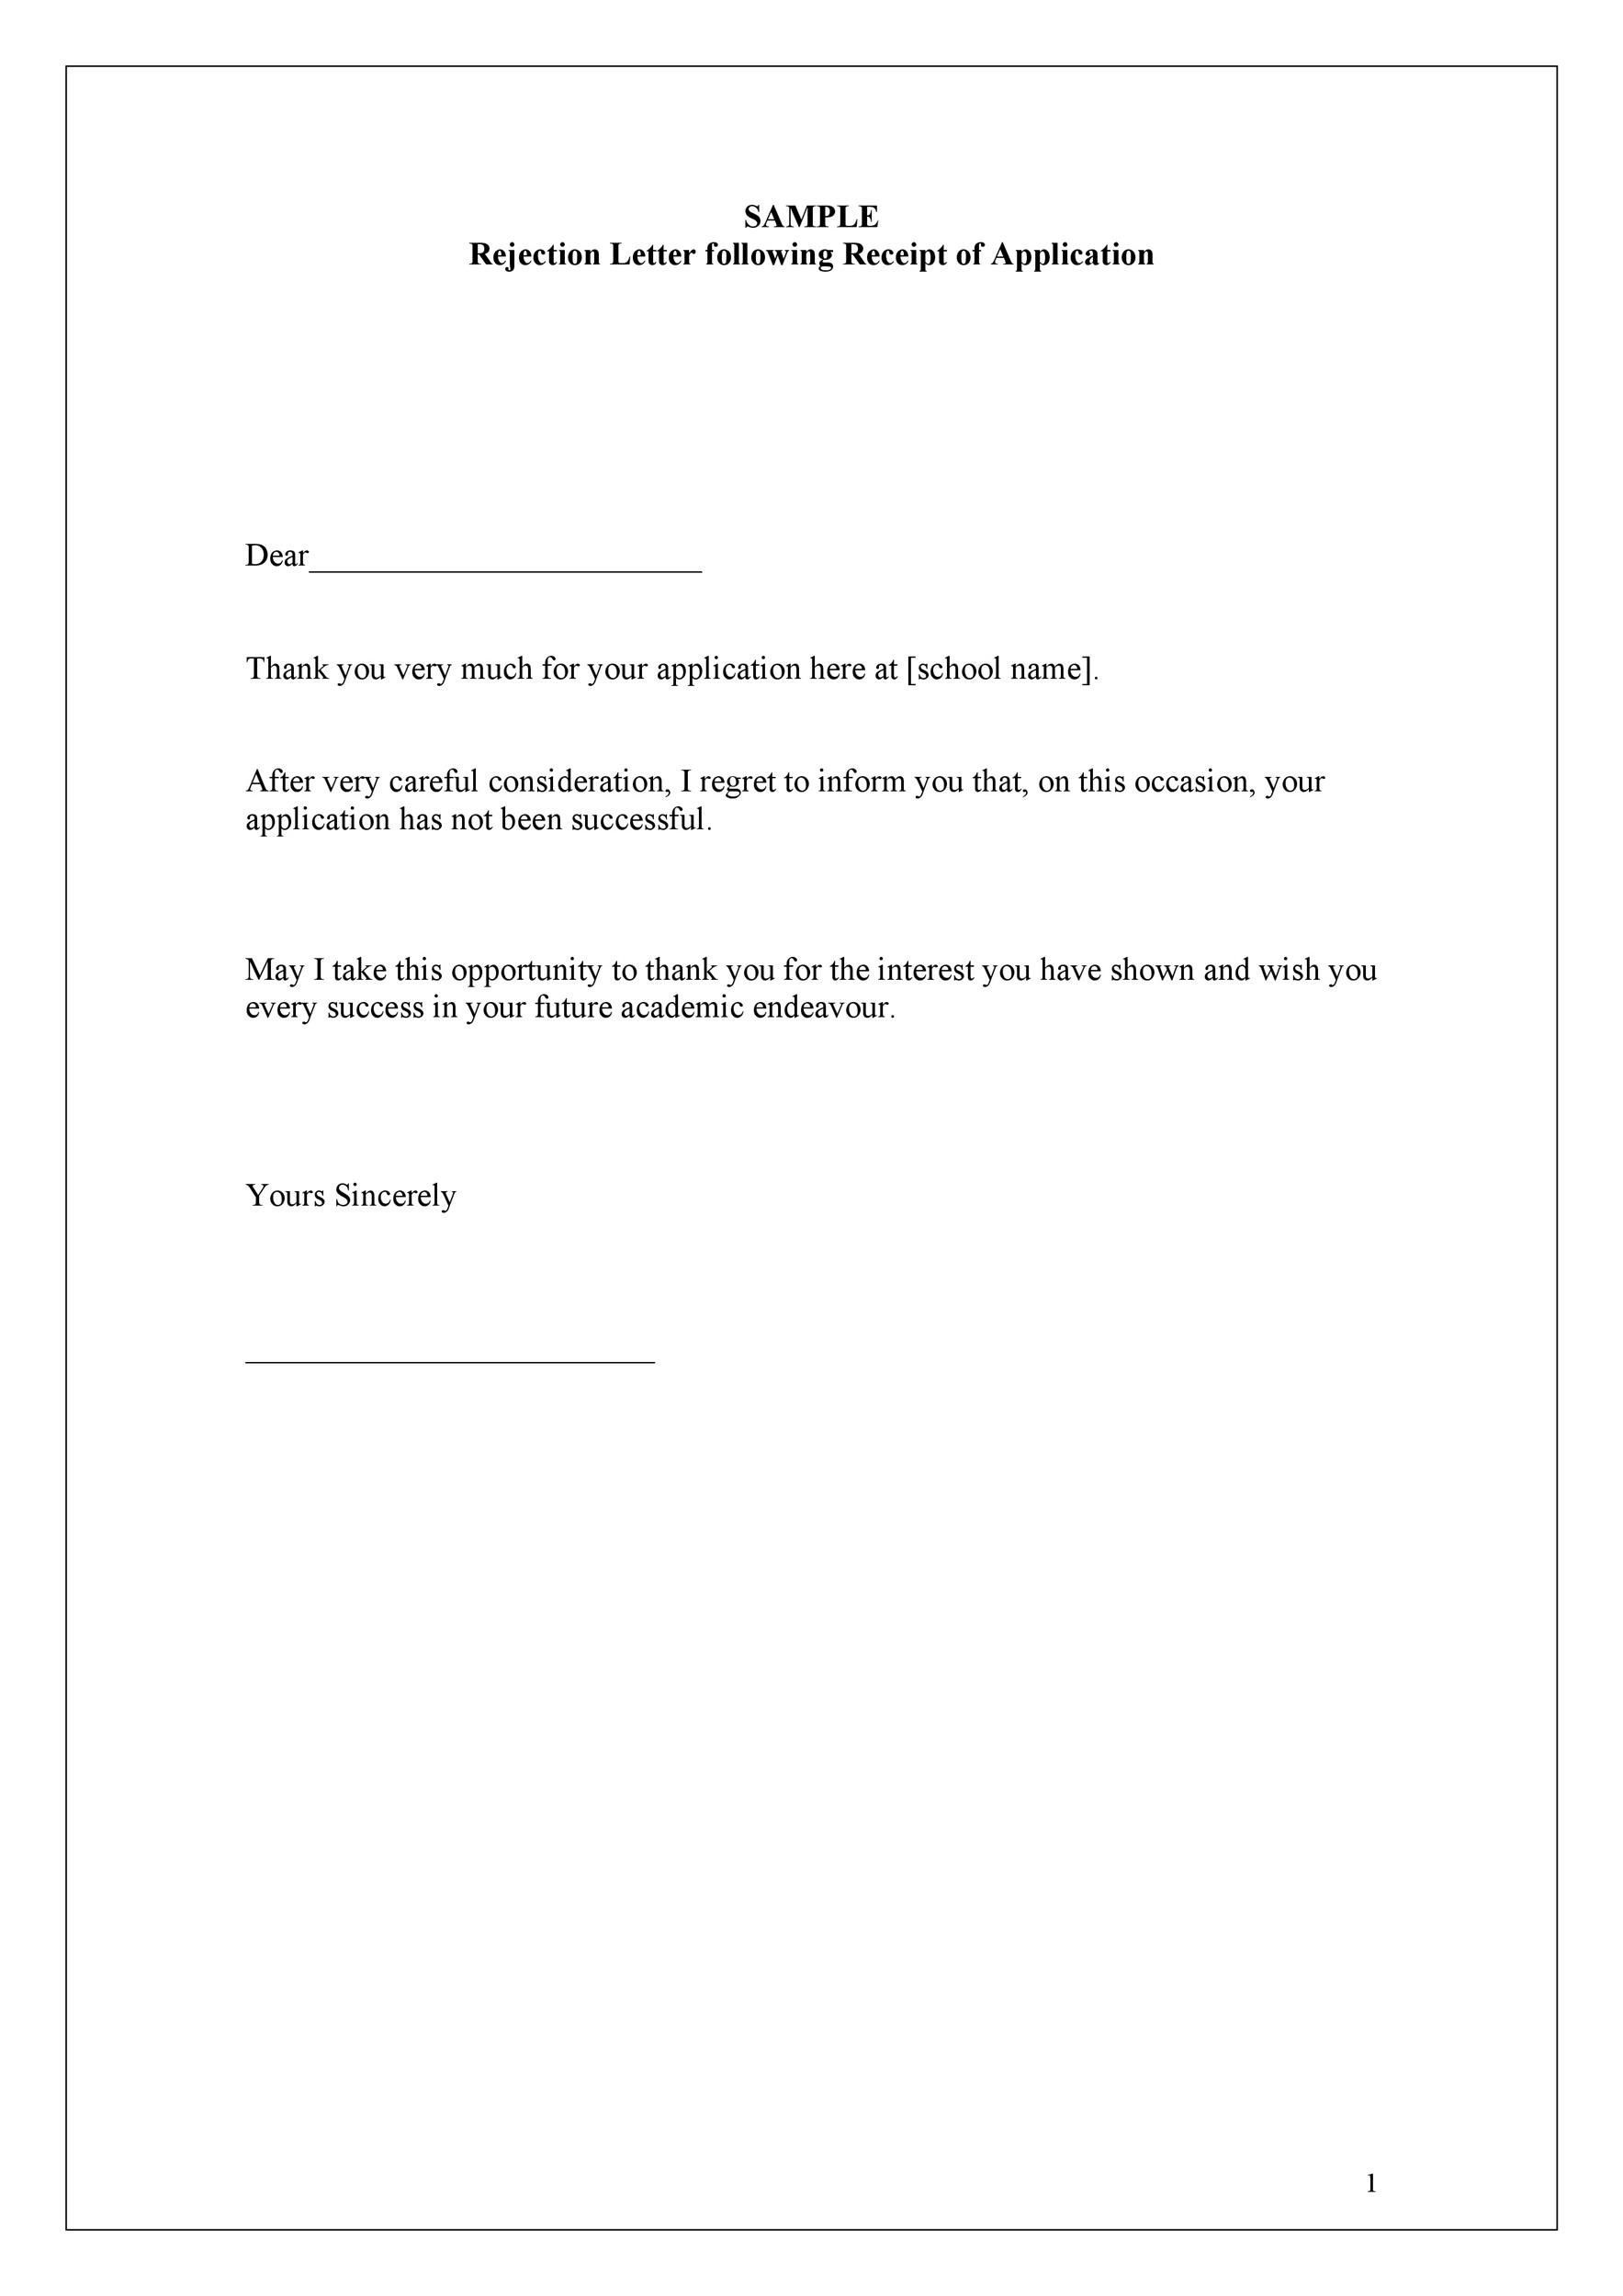 Rental Application Rejection Letter from templatelab.com